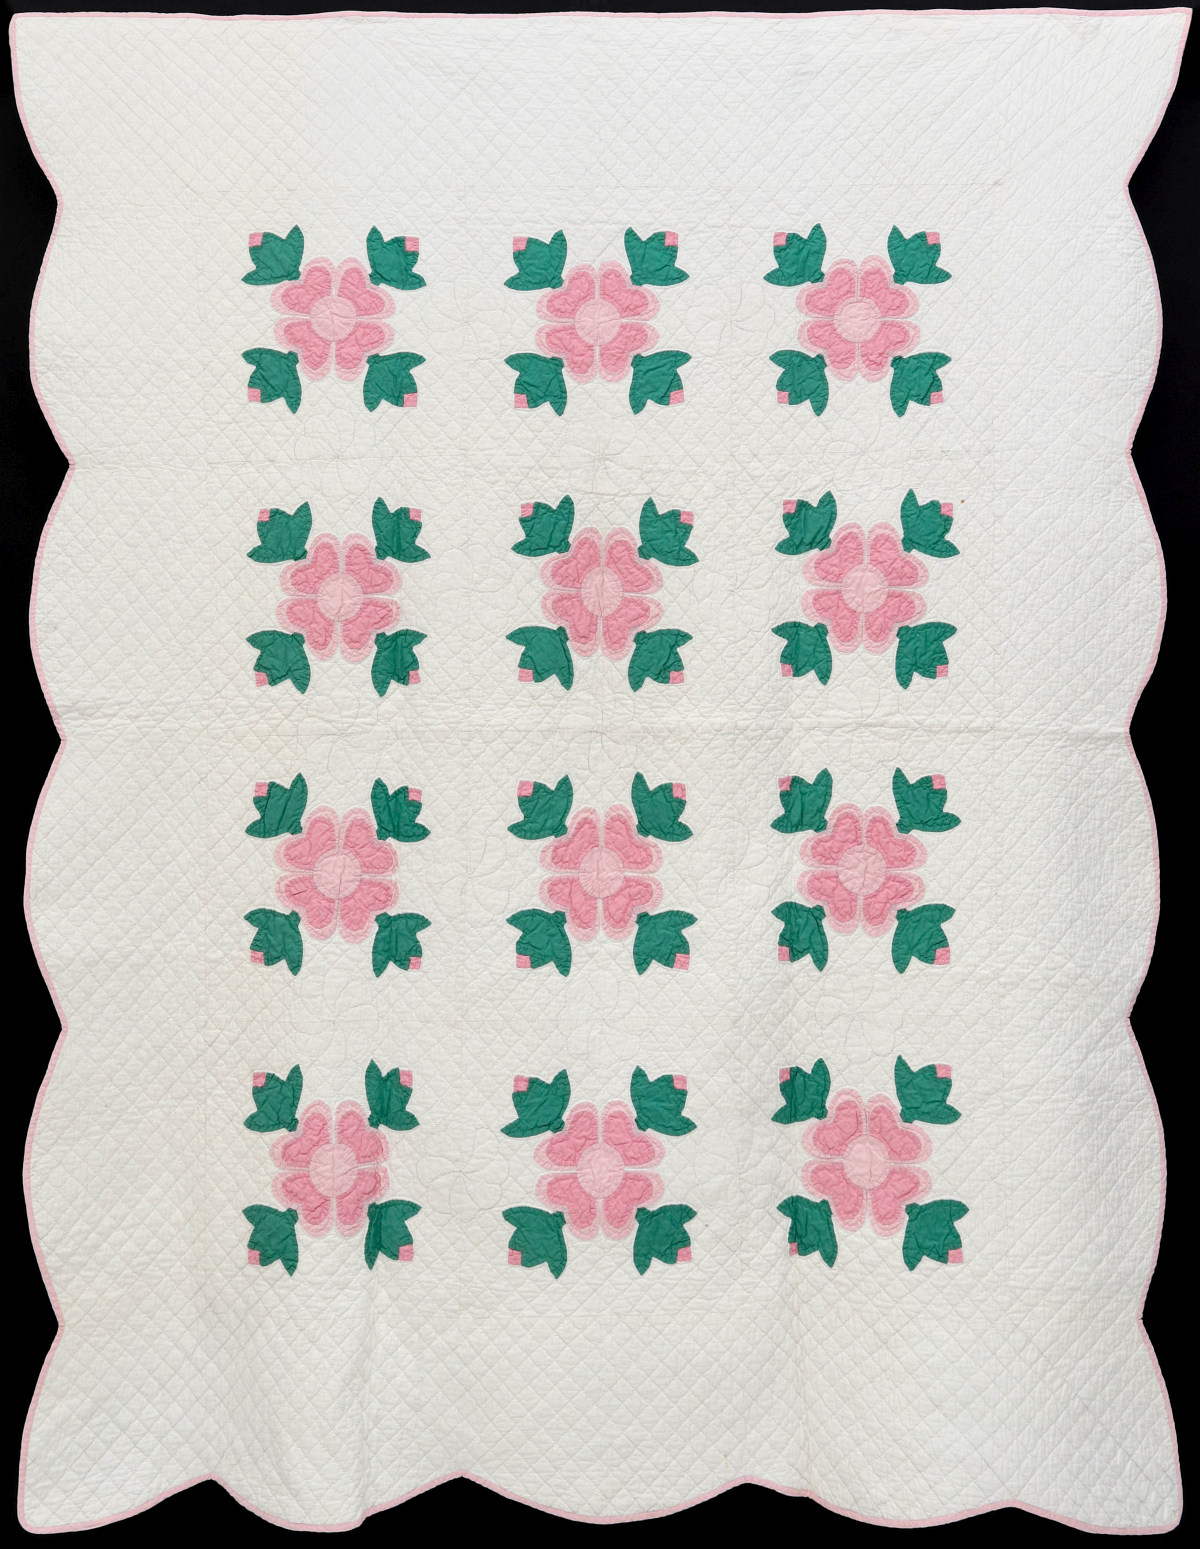 A NICE PINK AND GREEN APPLIQUE CROSSED TULIPS QUILT